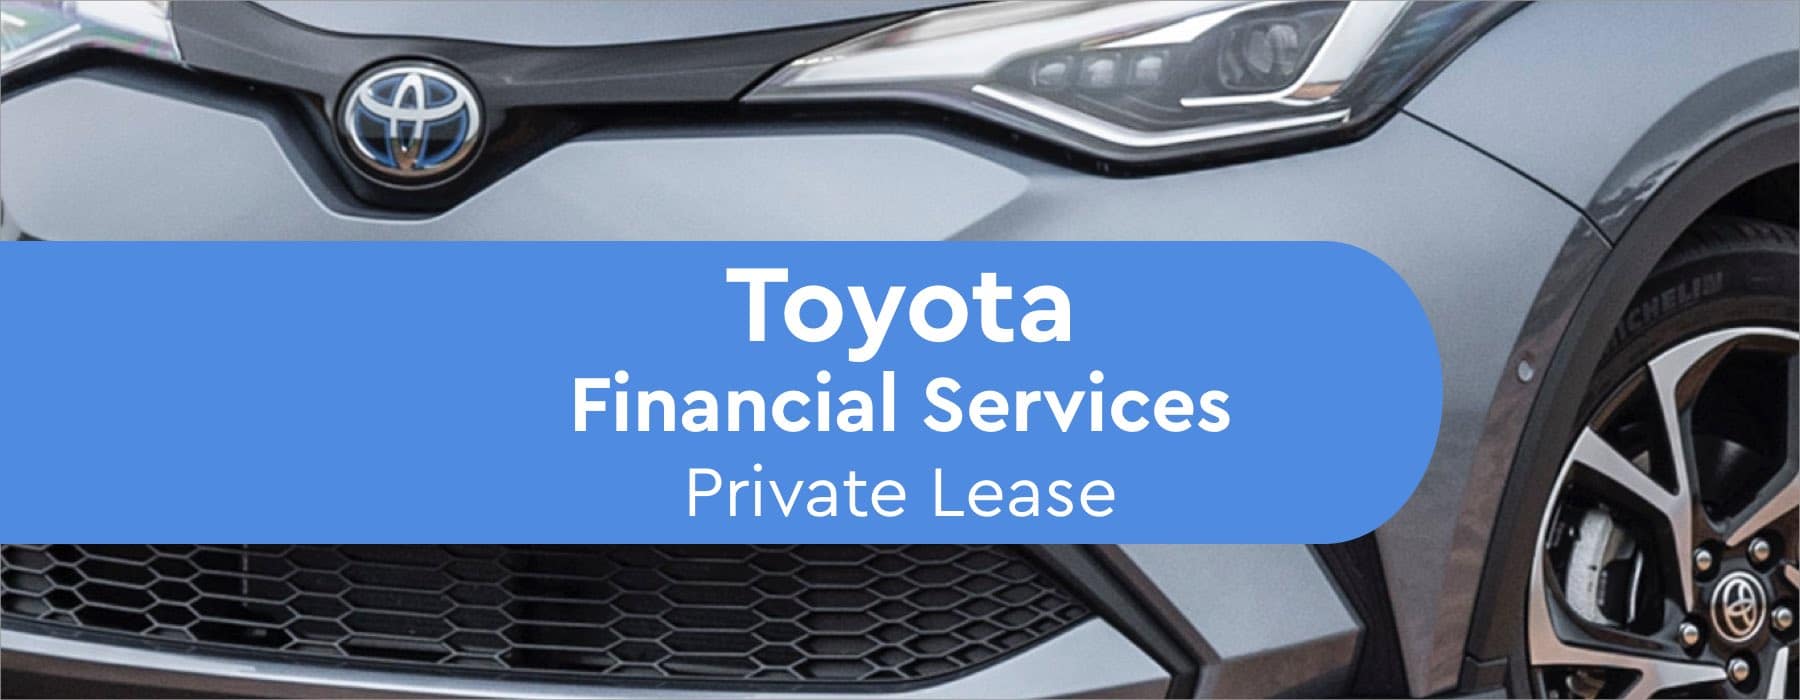 toyota financial services Private Lease